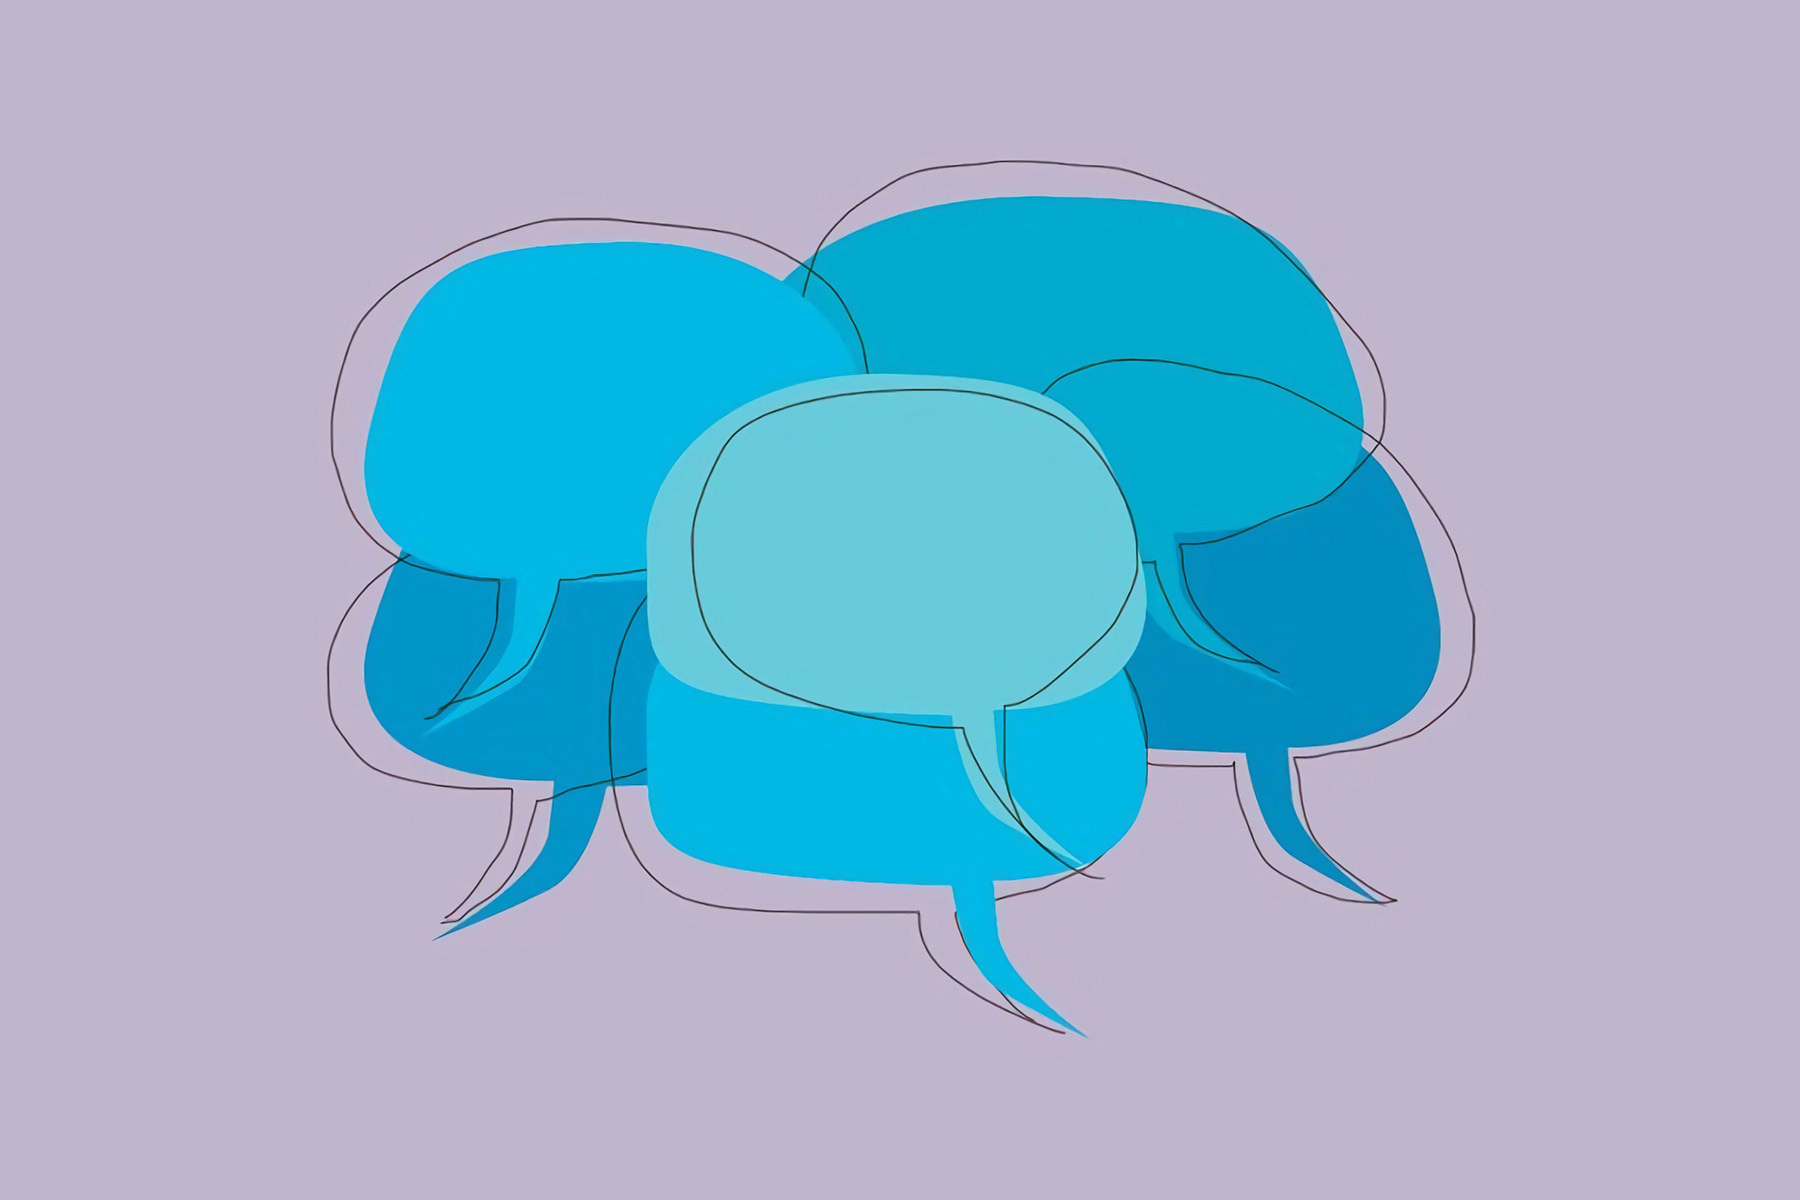 An illustration of a bunch of blue speech bubbles on a violet background.